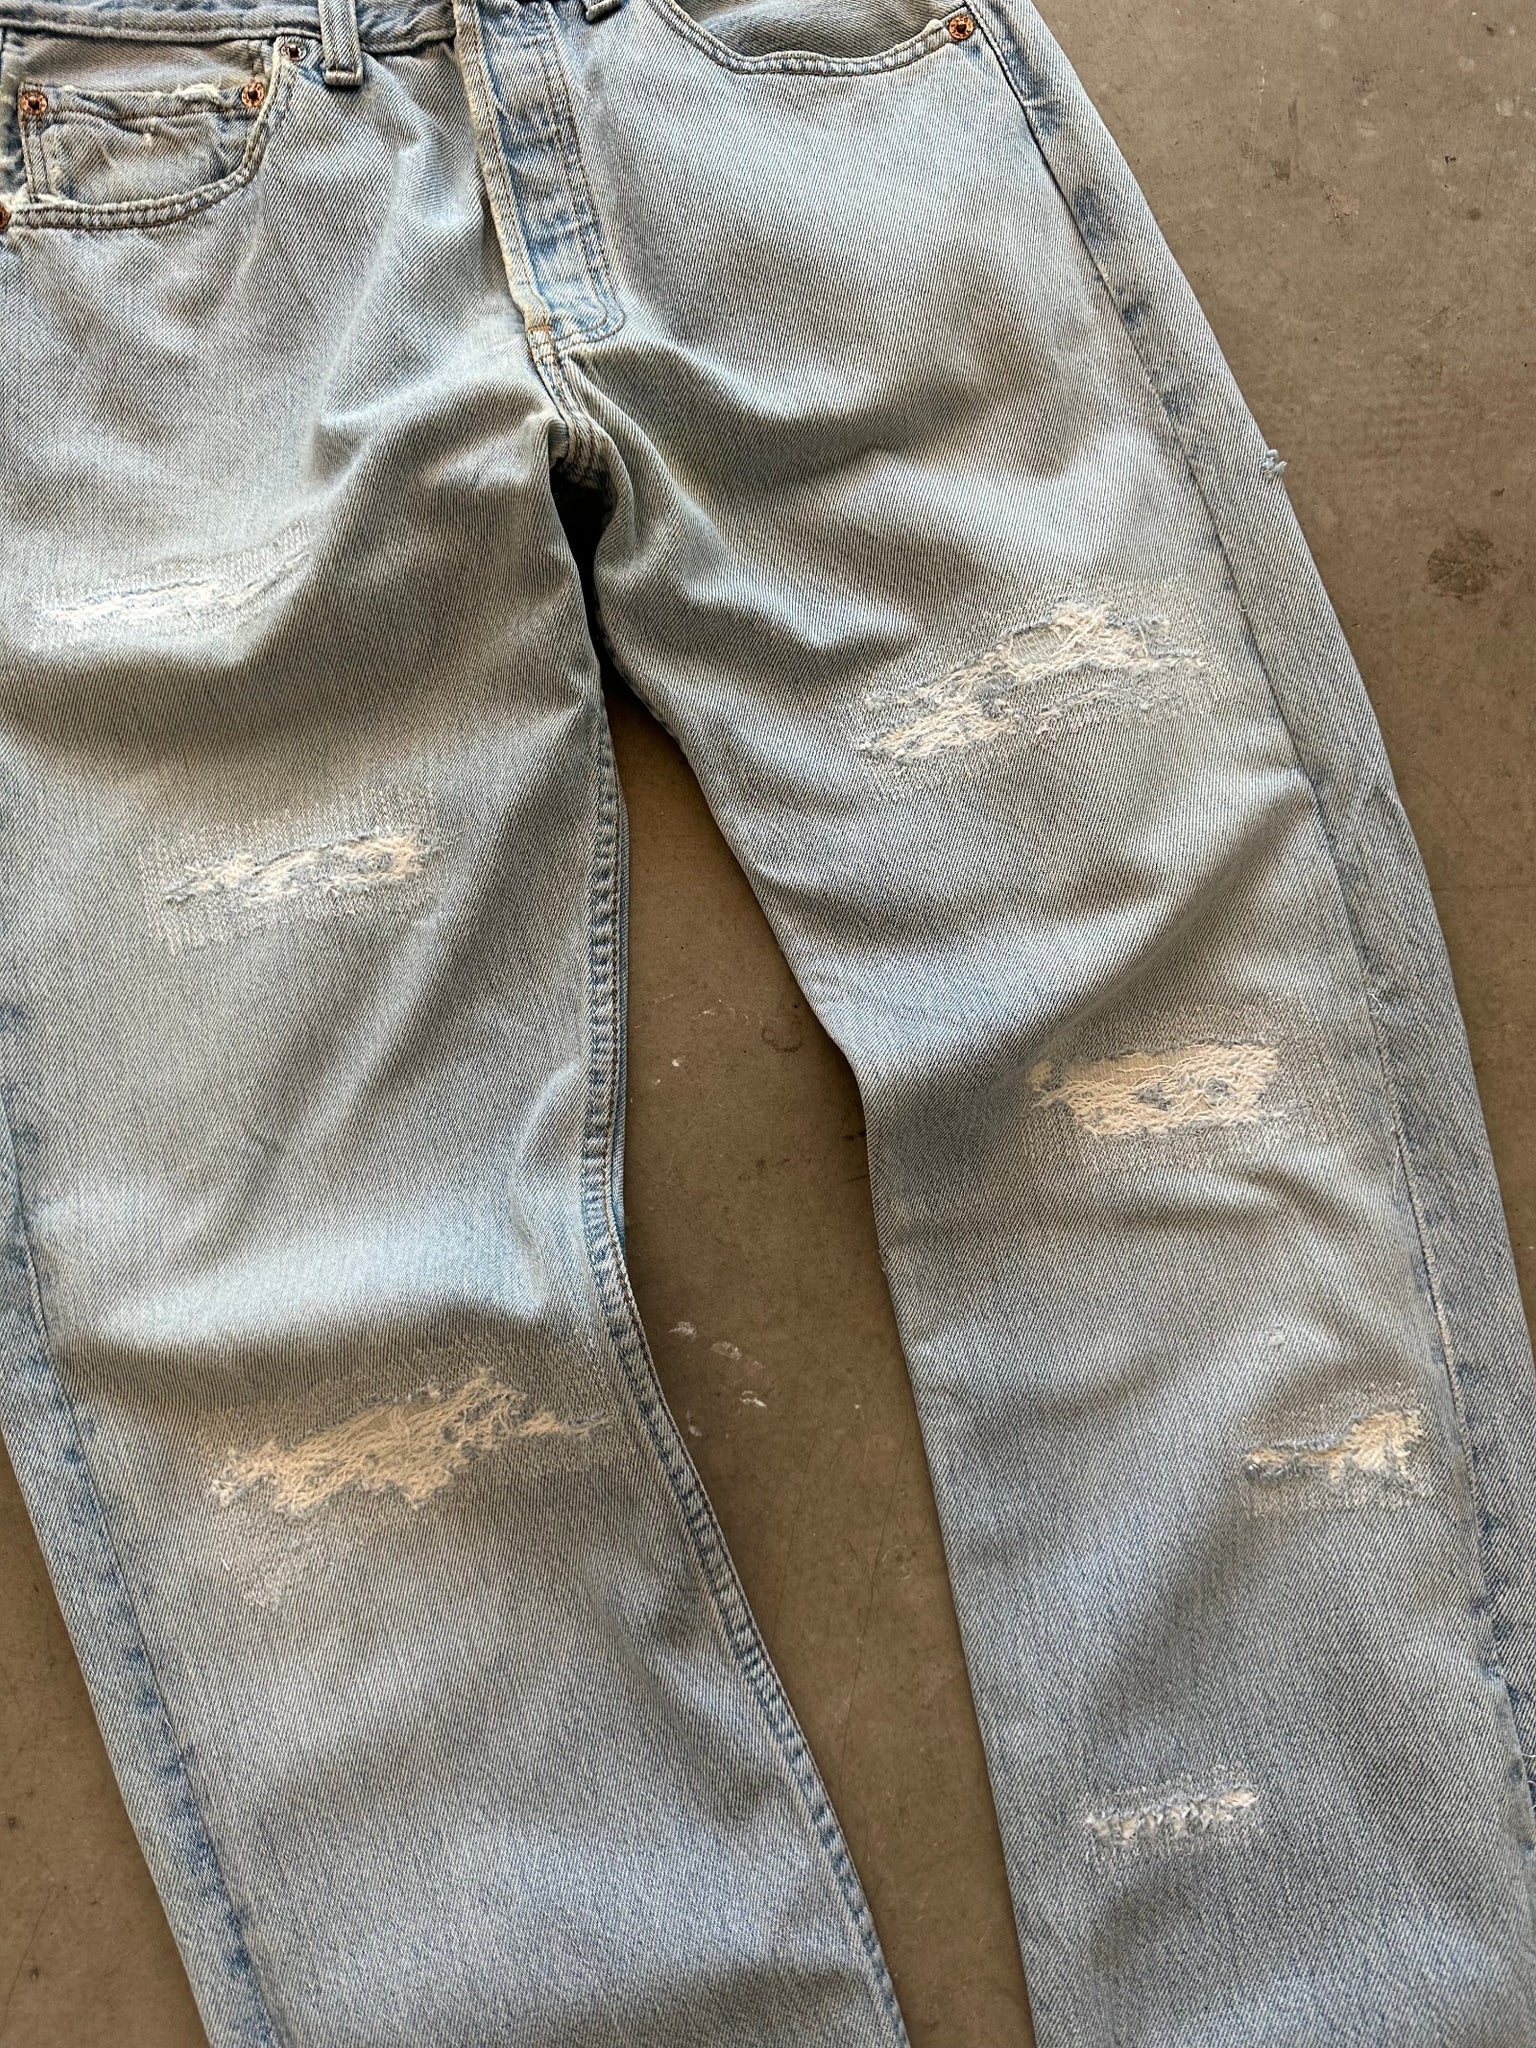 1990's Levis 501 Repaired Jeans - 31 x 32